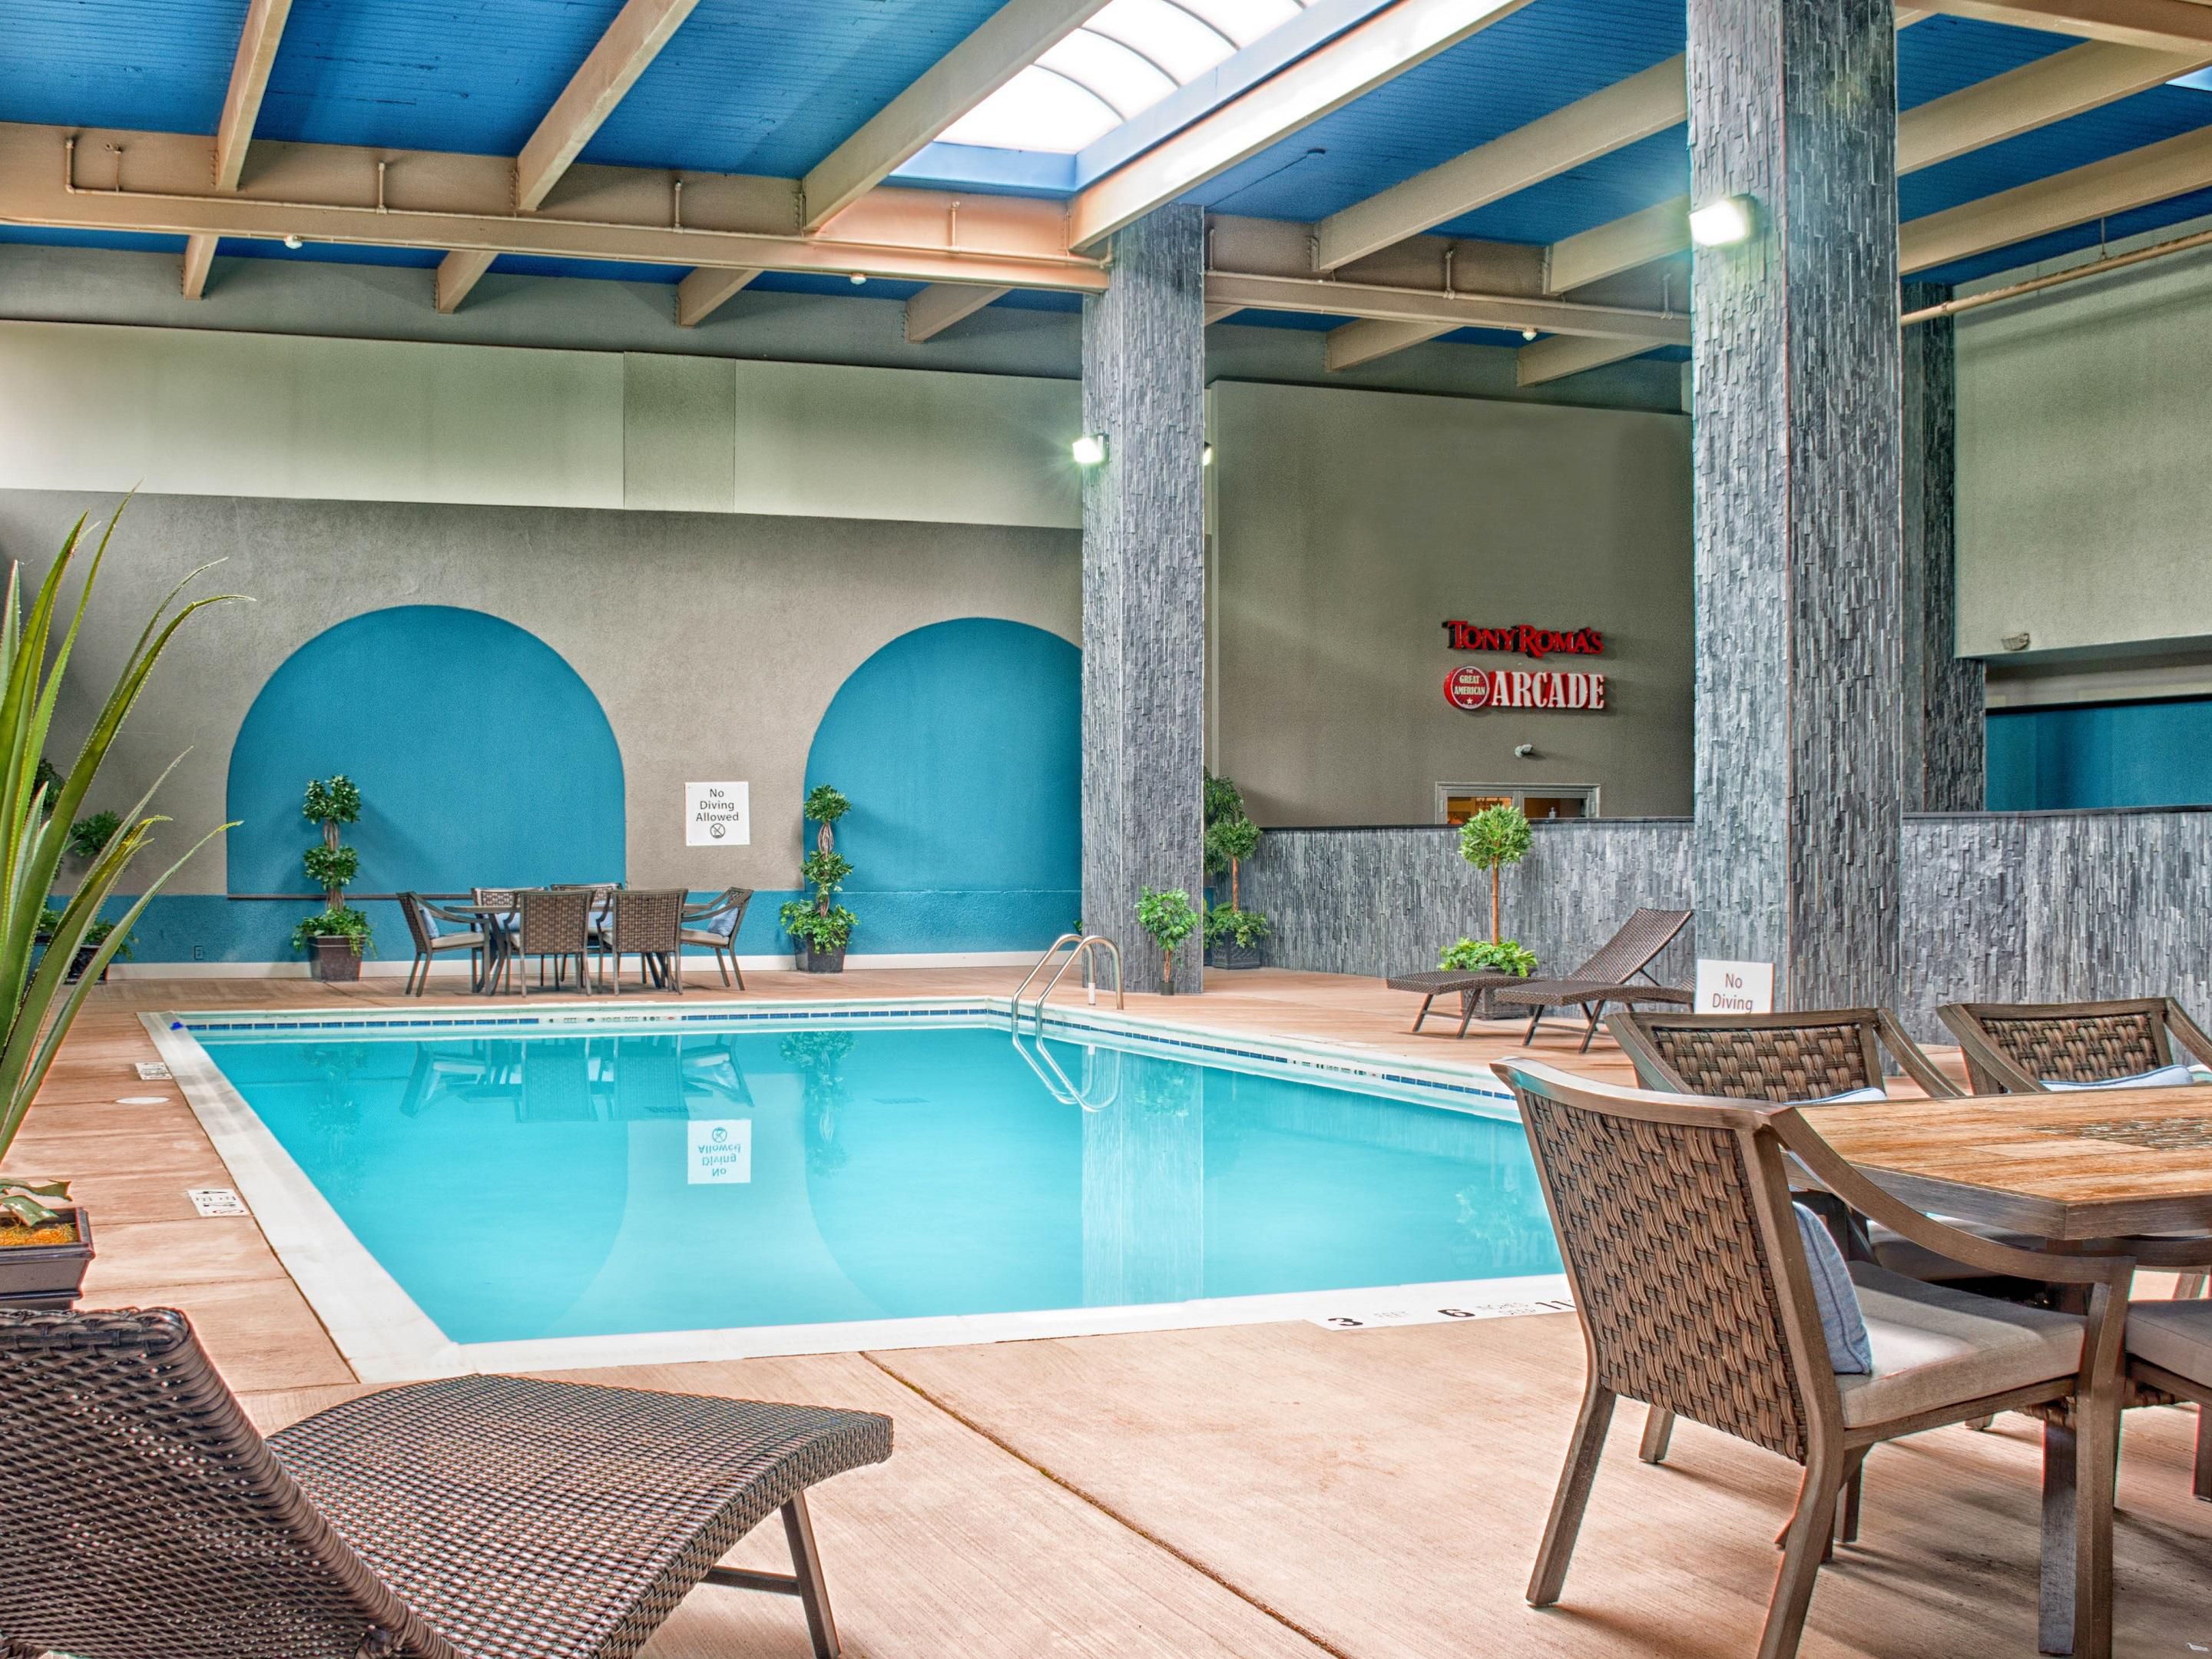 We offer a spacious indoor heated pool open daily from 8:00am - 11:00pm 